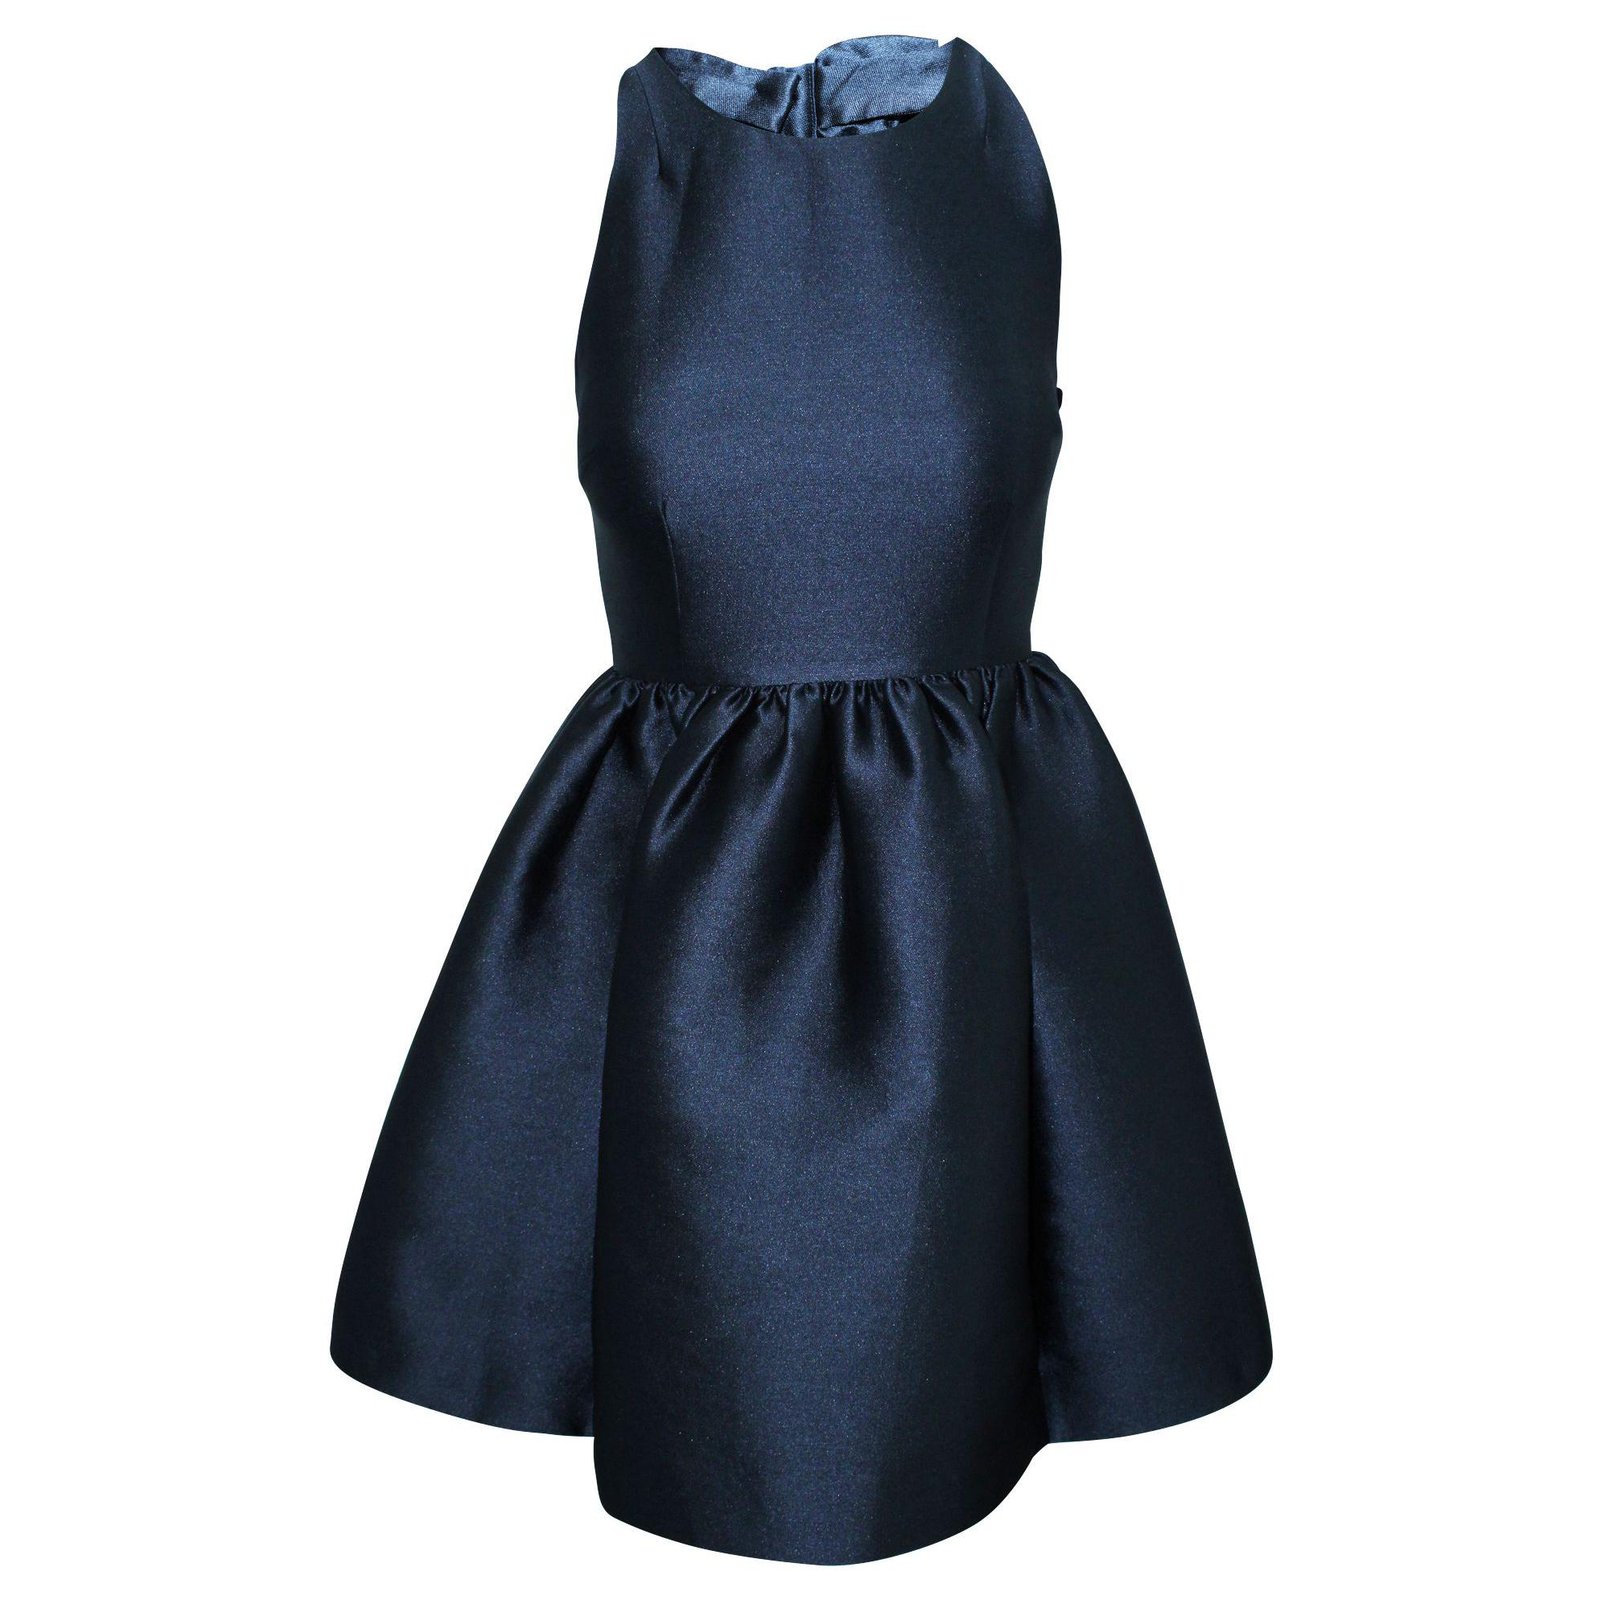 Kate Spade Bow Back Dress in Blue